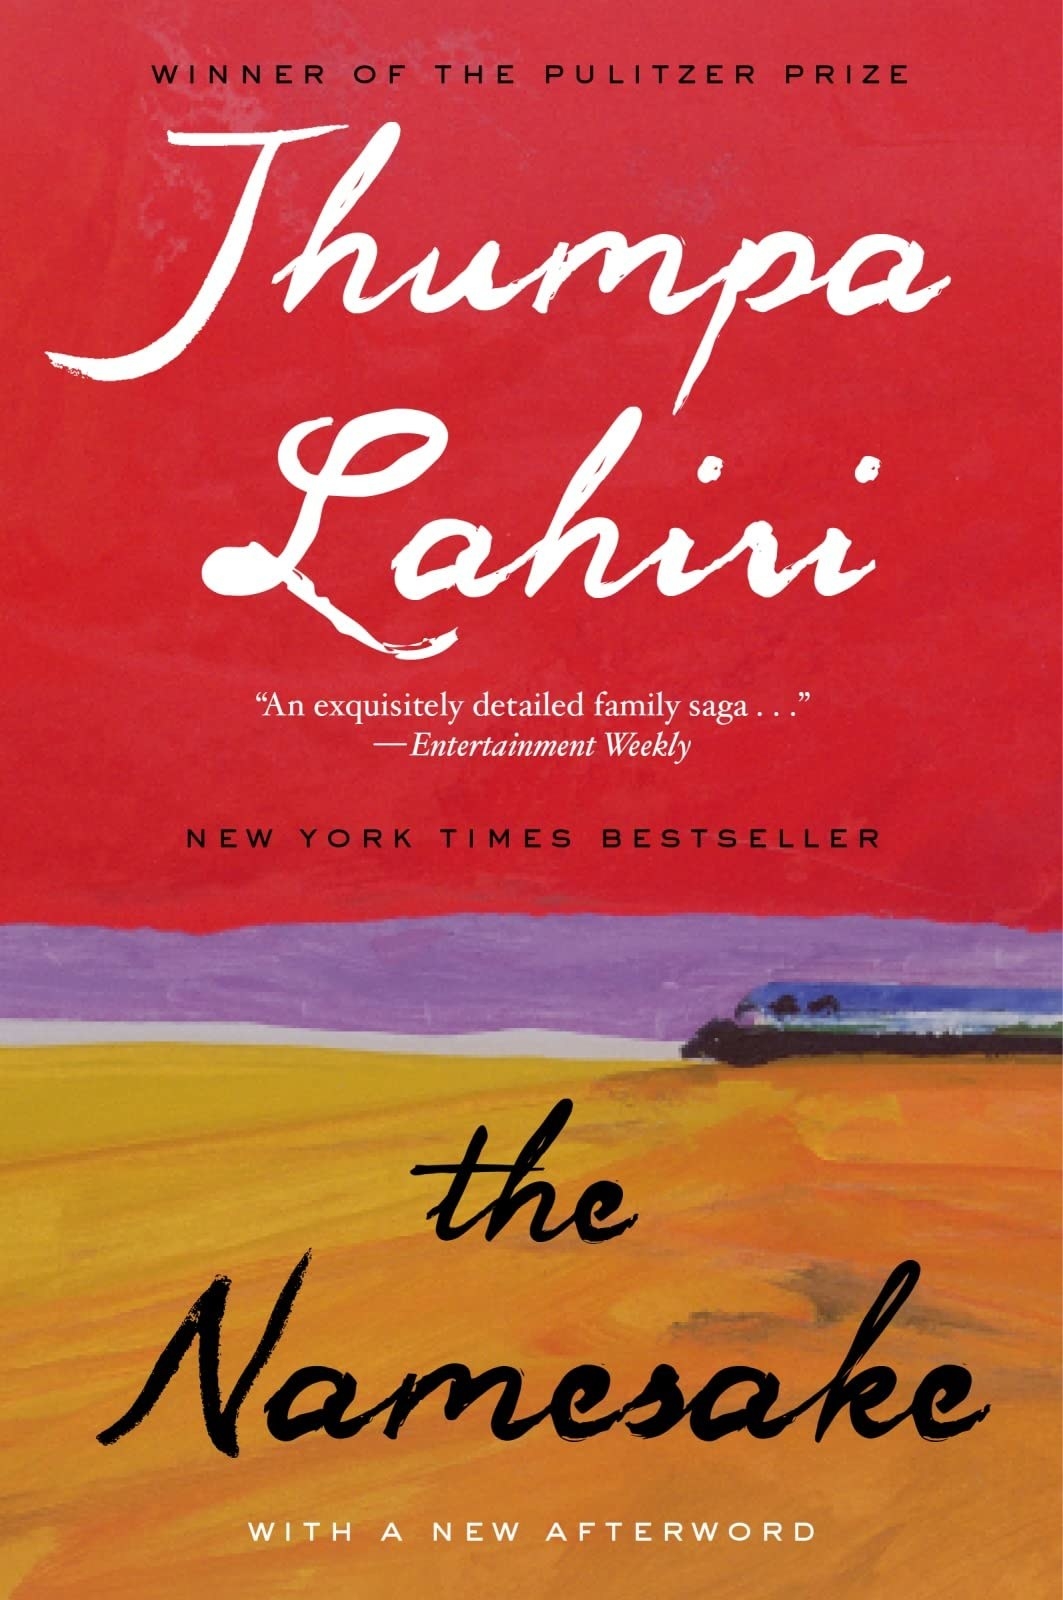 the cover of the namesake book